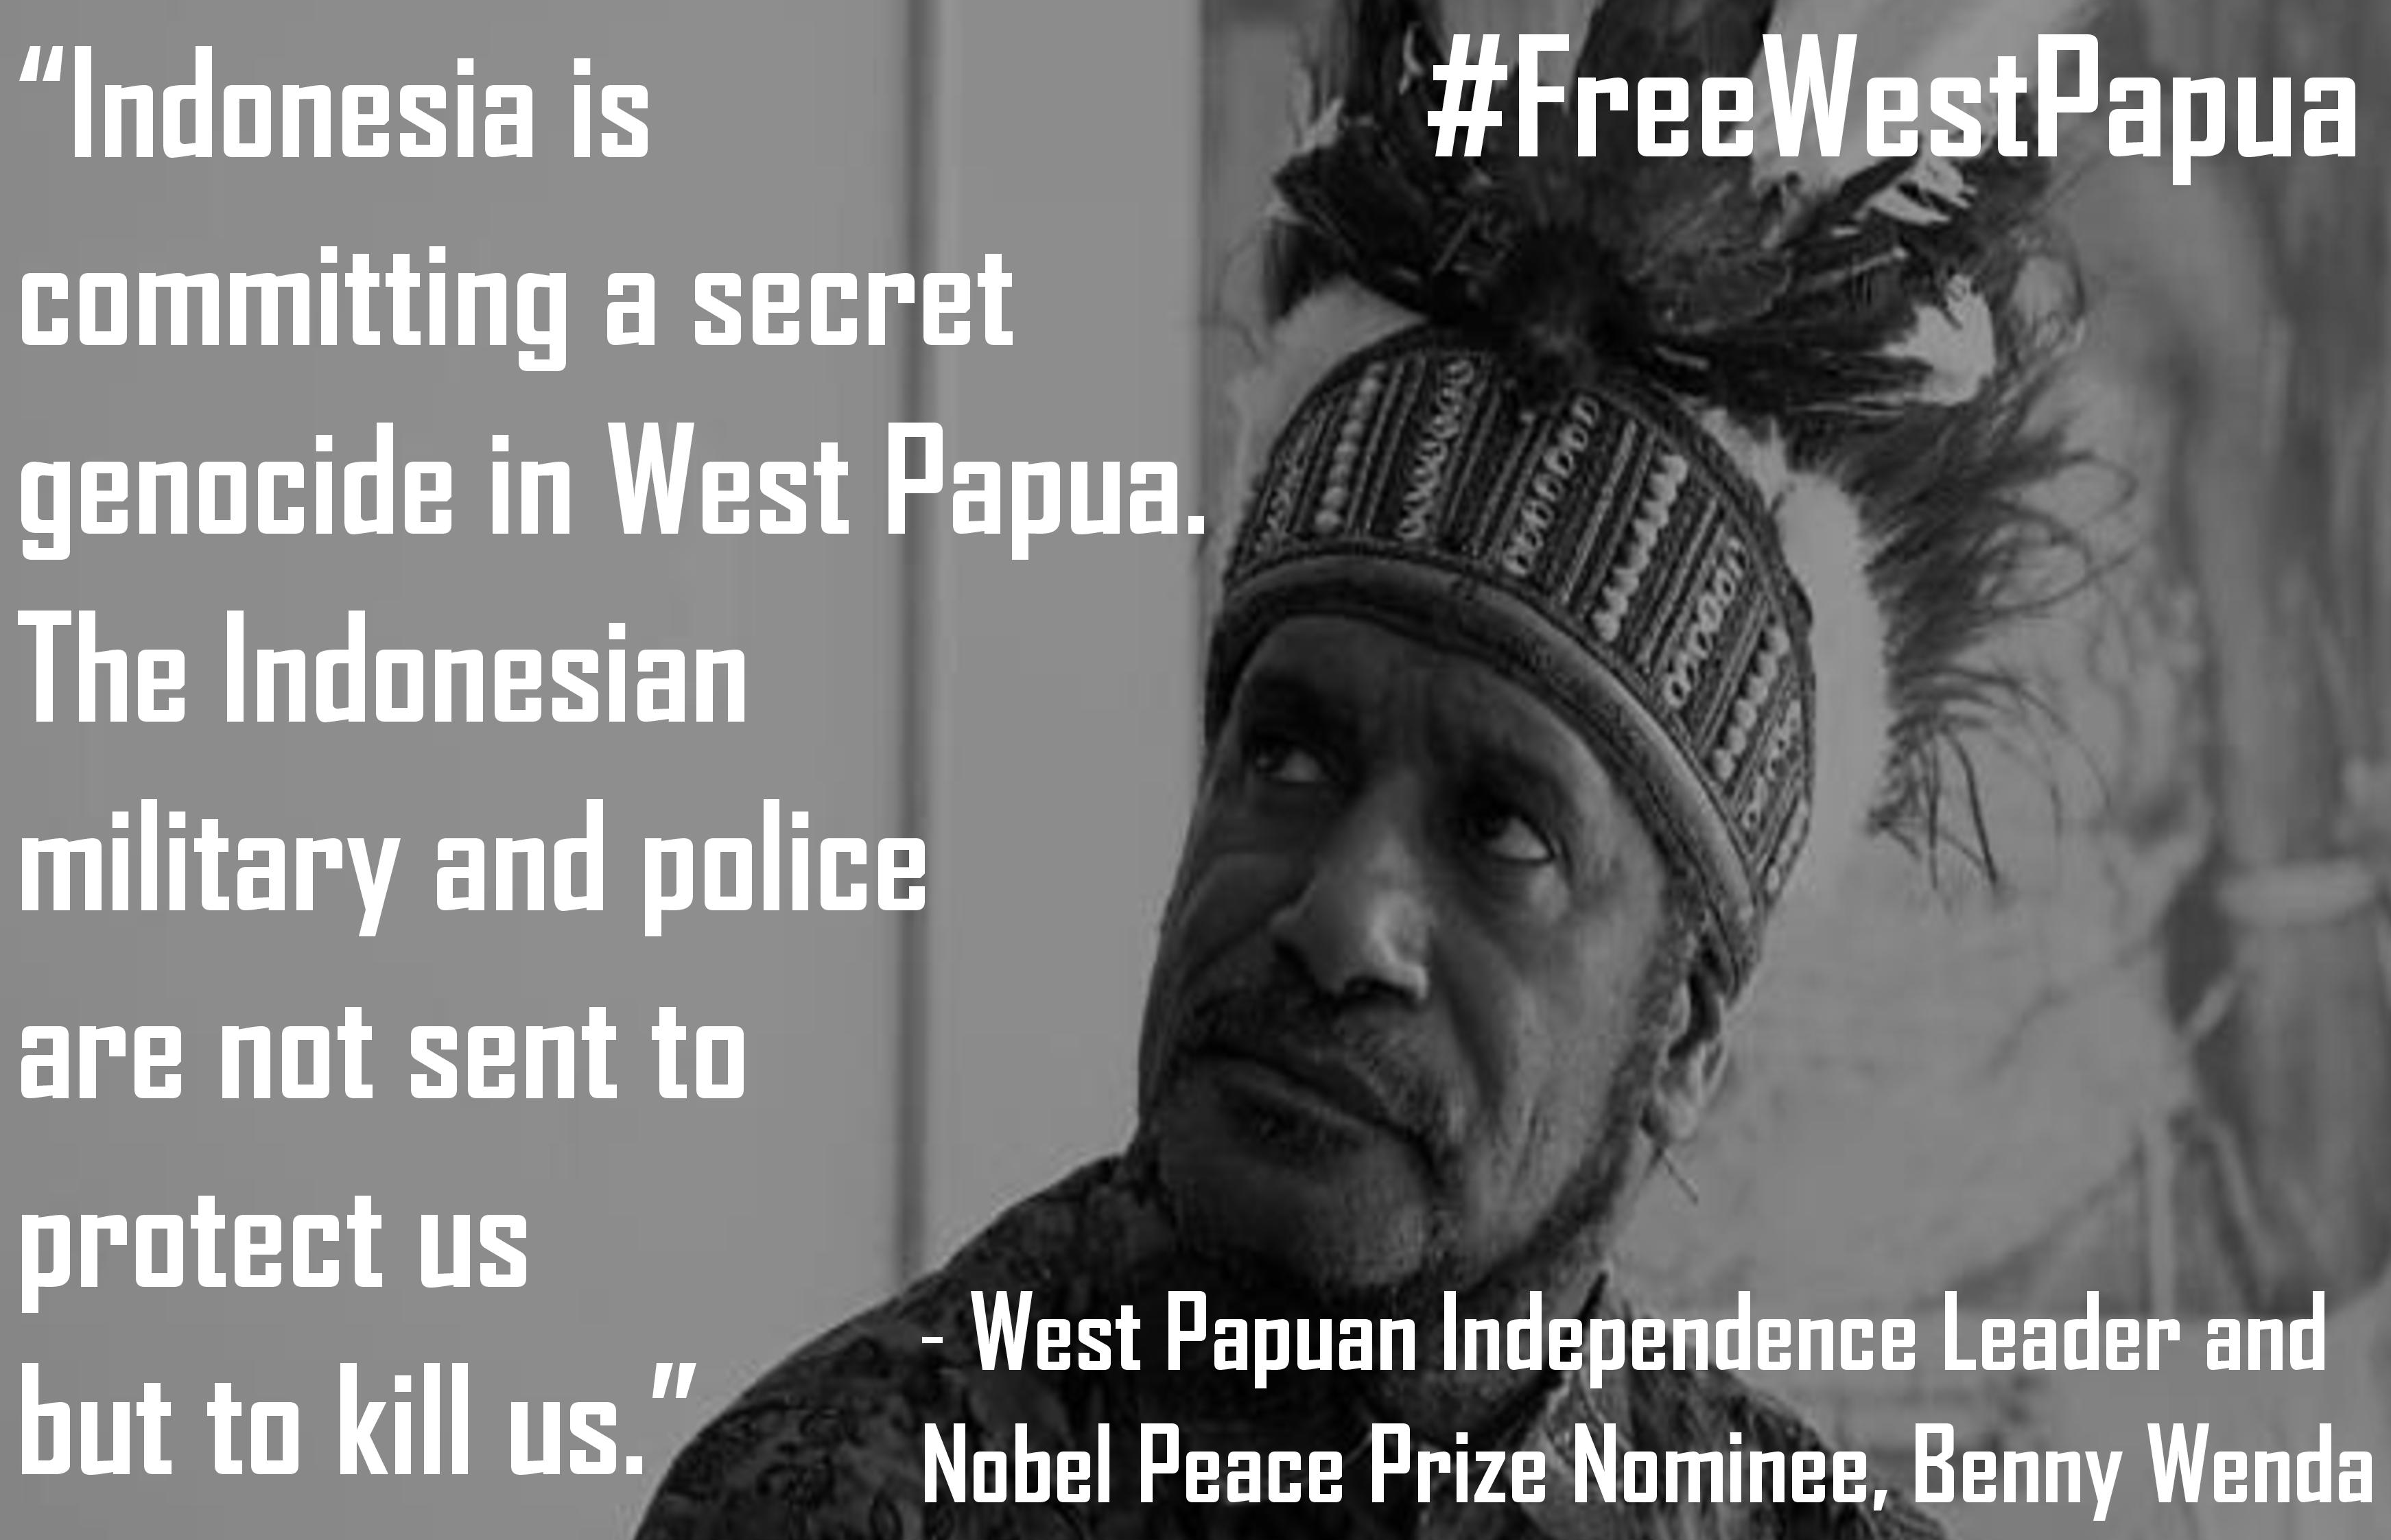 Tidsplan forbi silke Massacre of 5 people in 24 hours – Under Indonesia, West Papua is becoming  another East Timor - Free West Papua